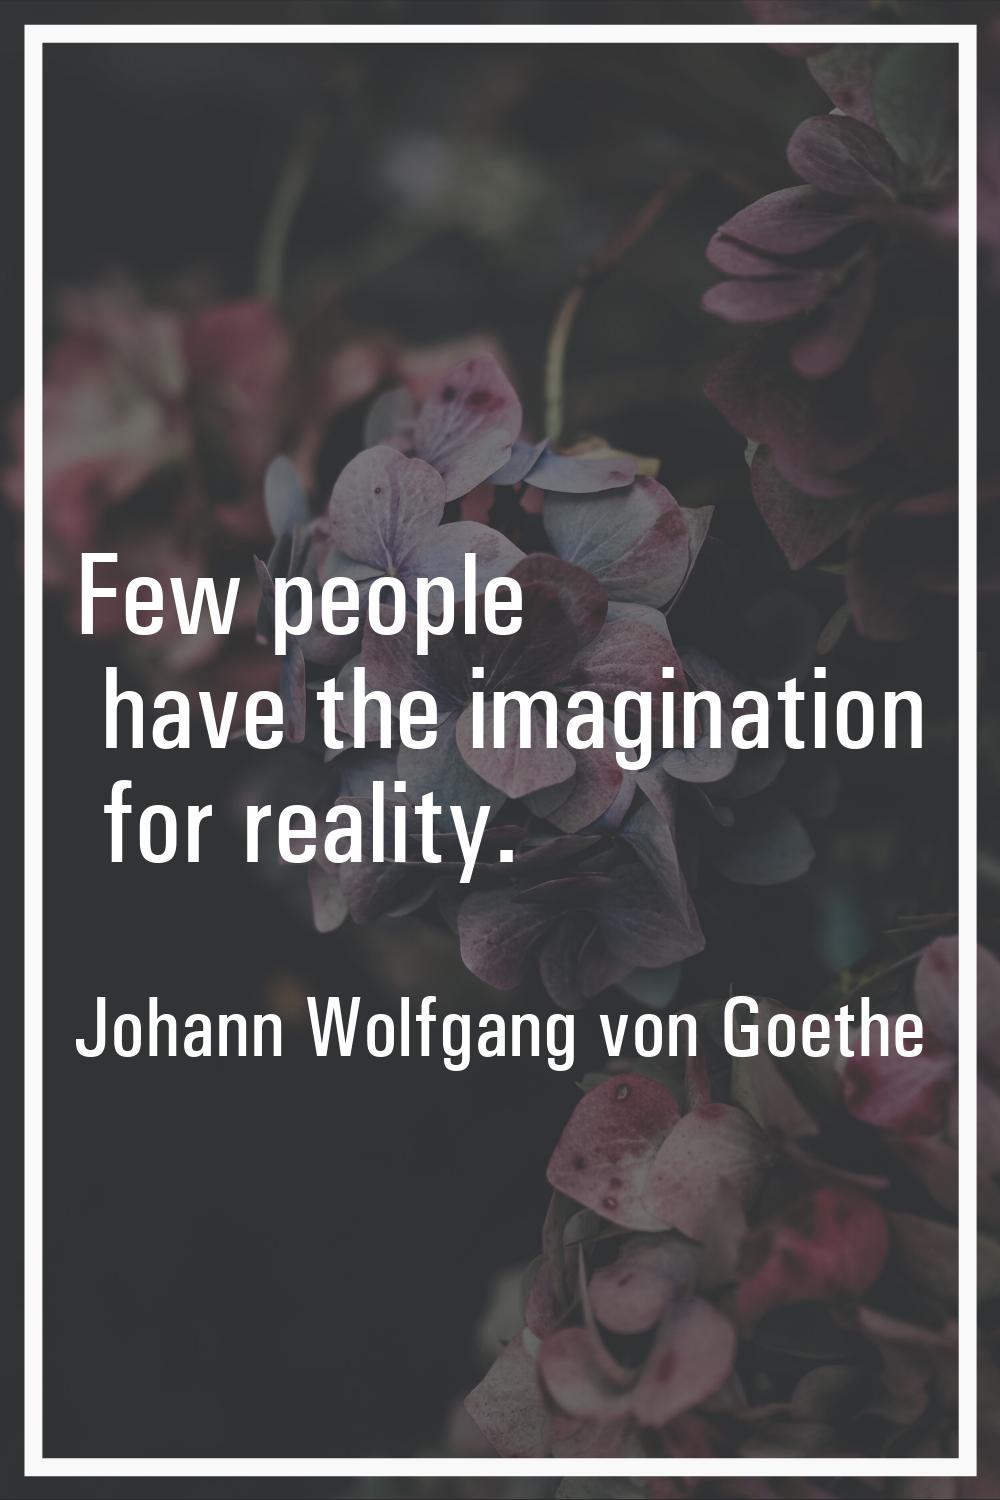 Few people have the imagination for reality.